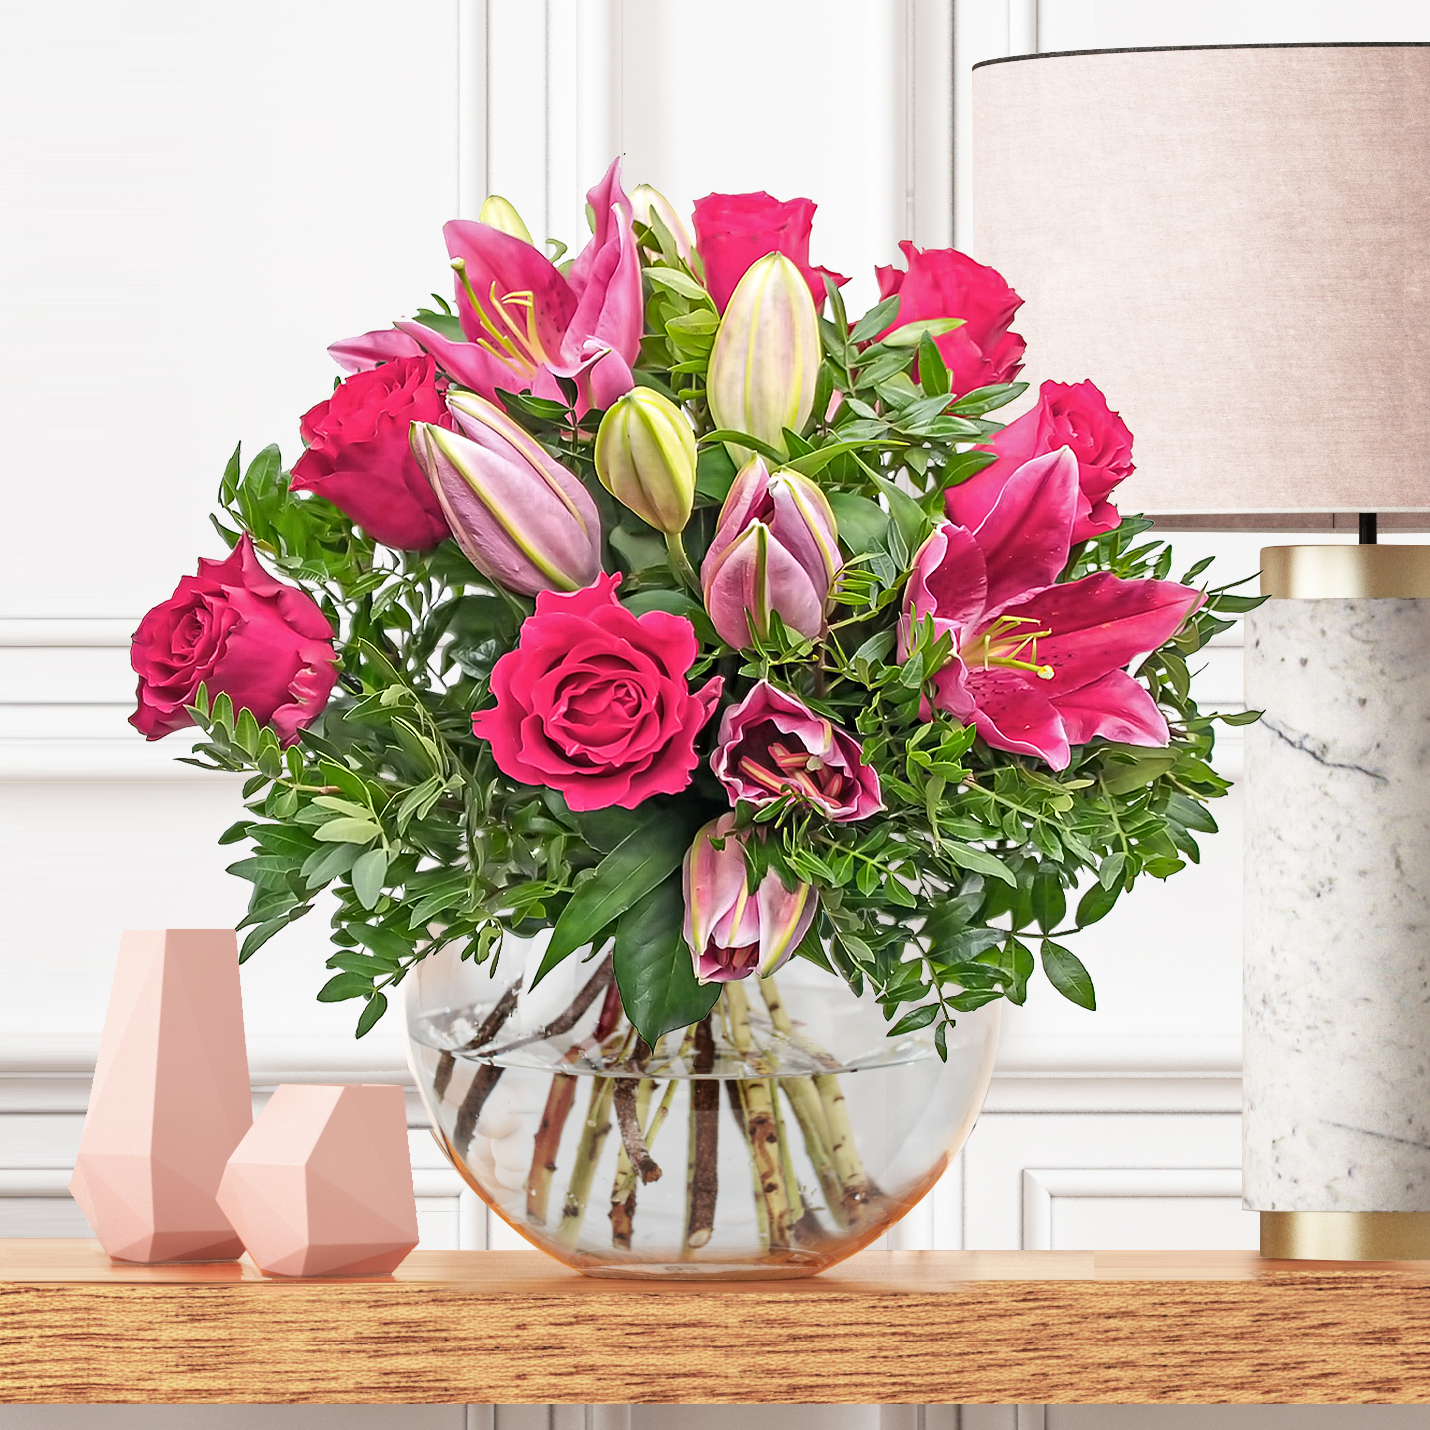 Present Online Delivery Of Affordable Flowers Singapore On Memorable Dates